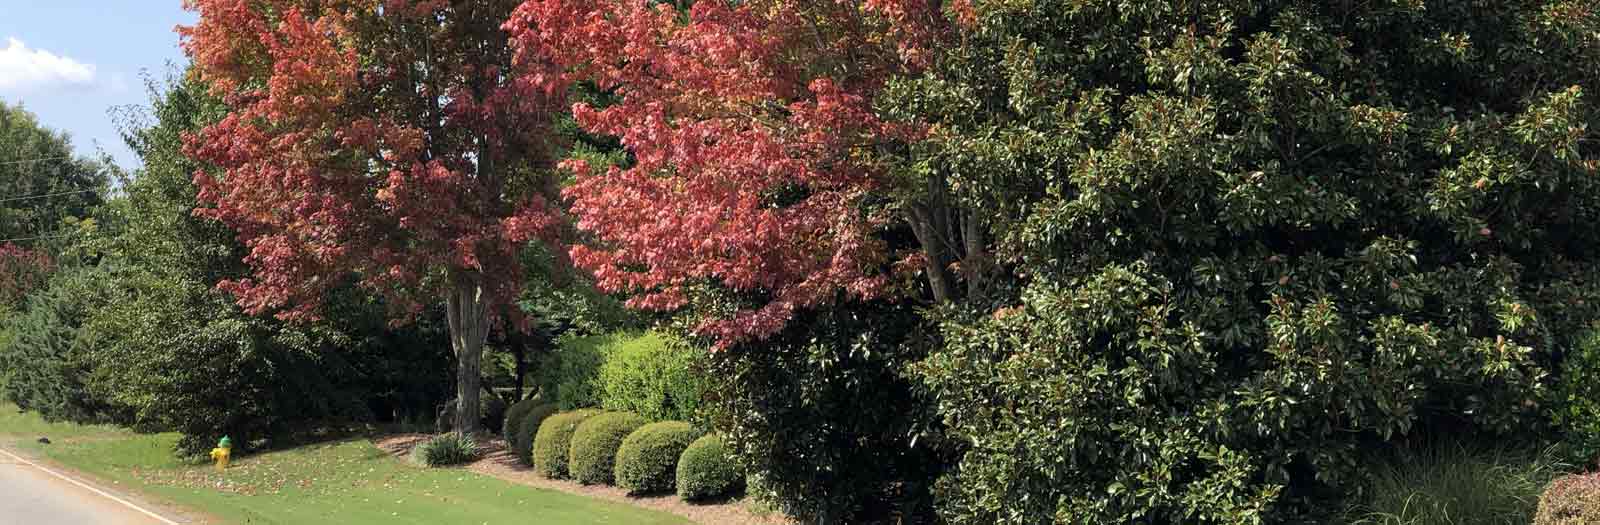 Fall Colors of Trees and Shrubs